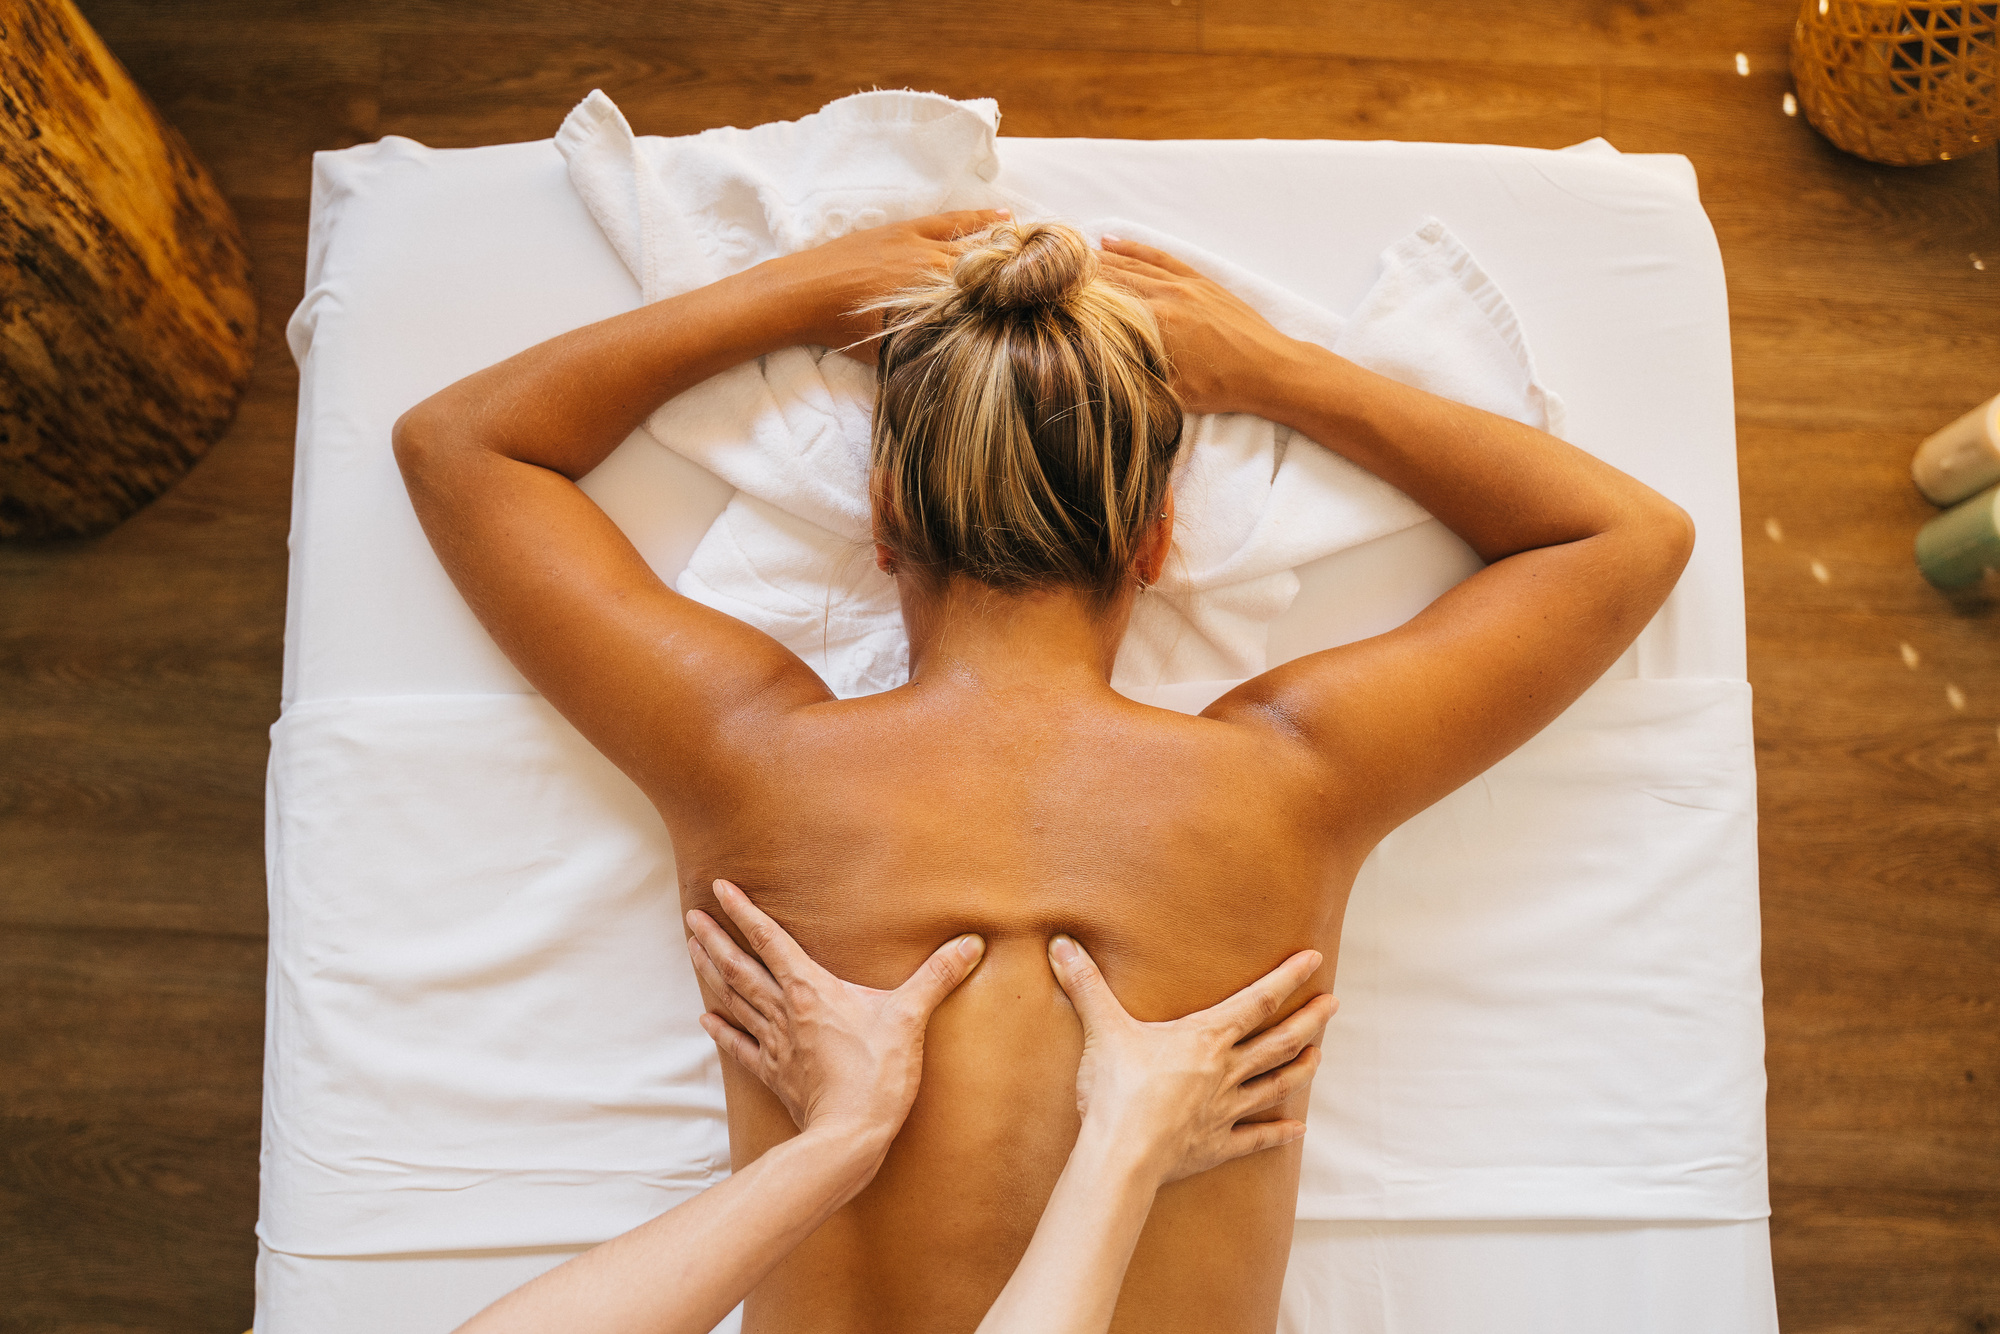 A Topless Woman Lying on Massage Table while Getting a Massage